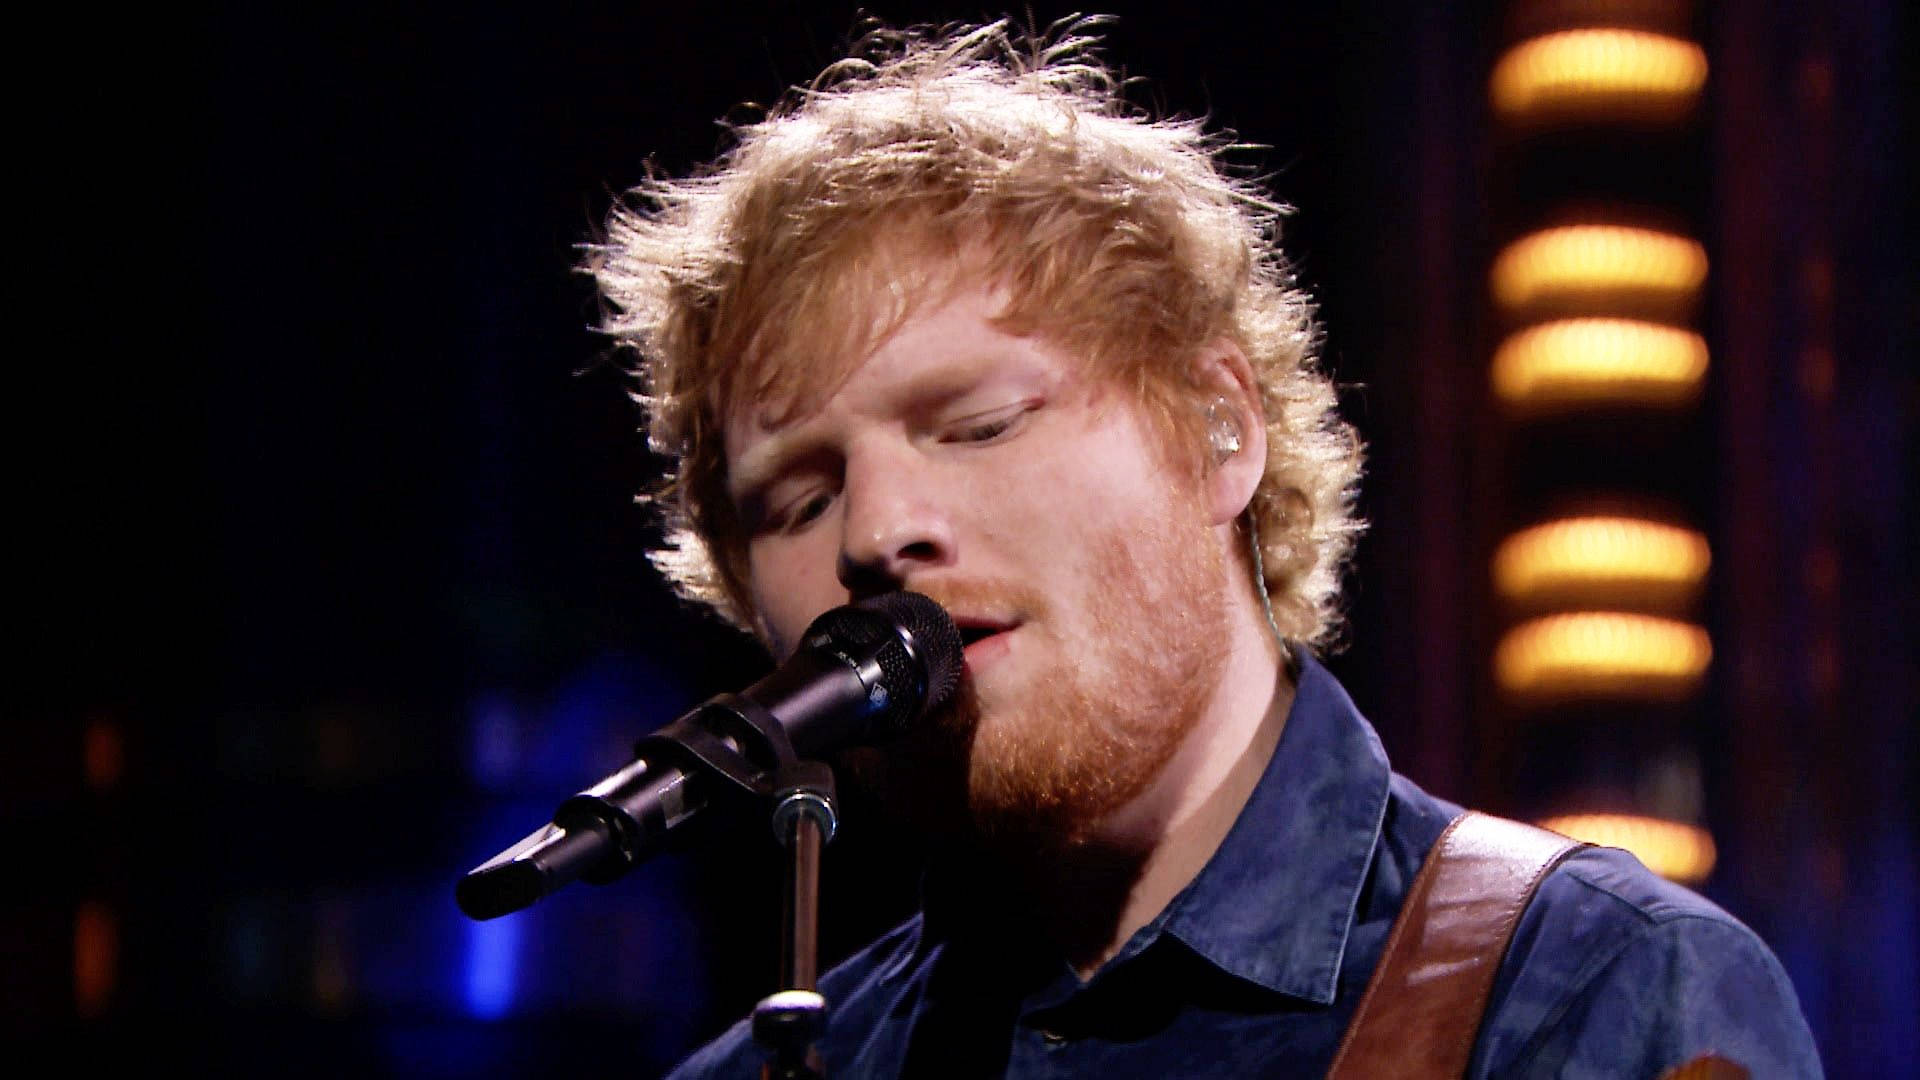 Ed Sheeran Performs On The Imagine Tour Background